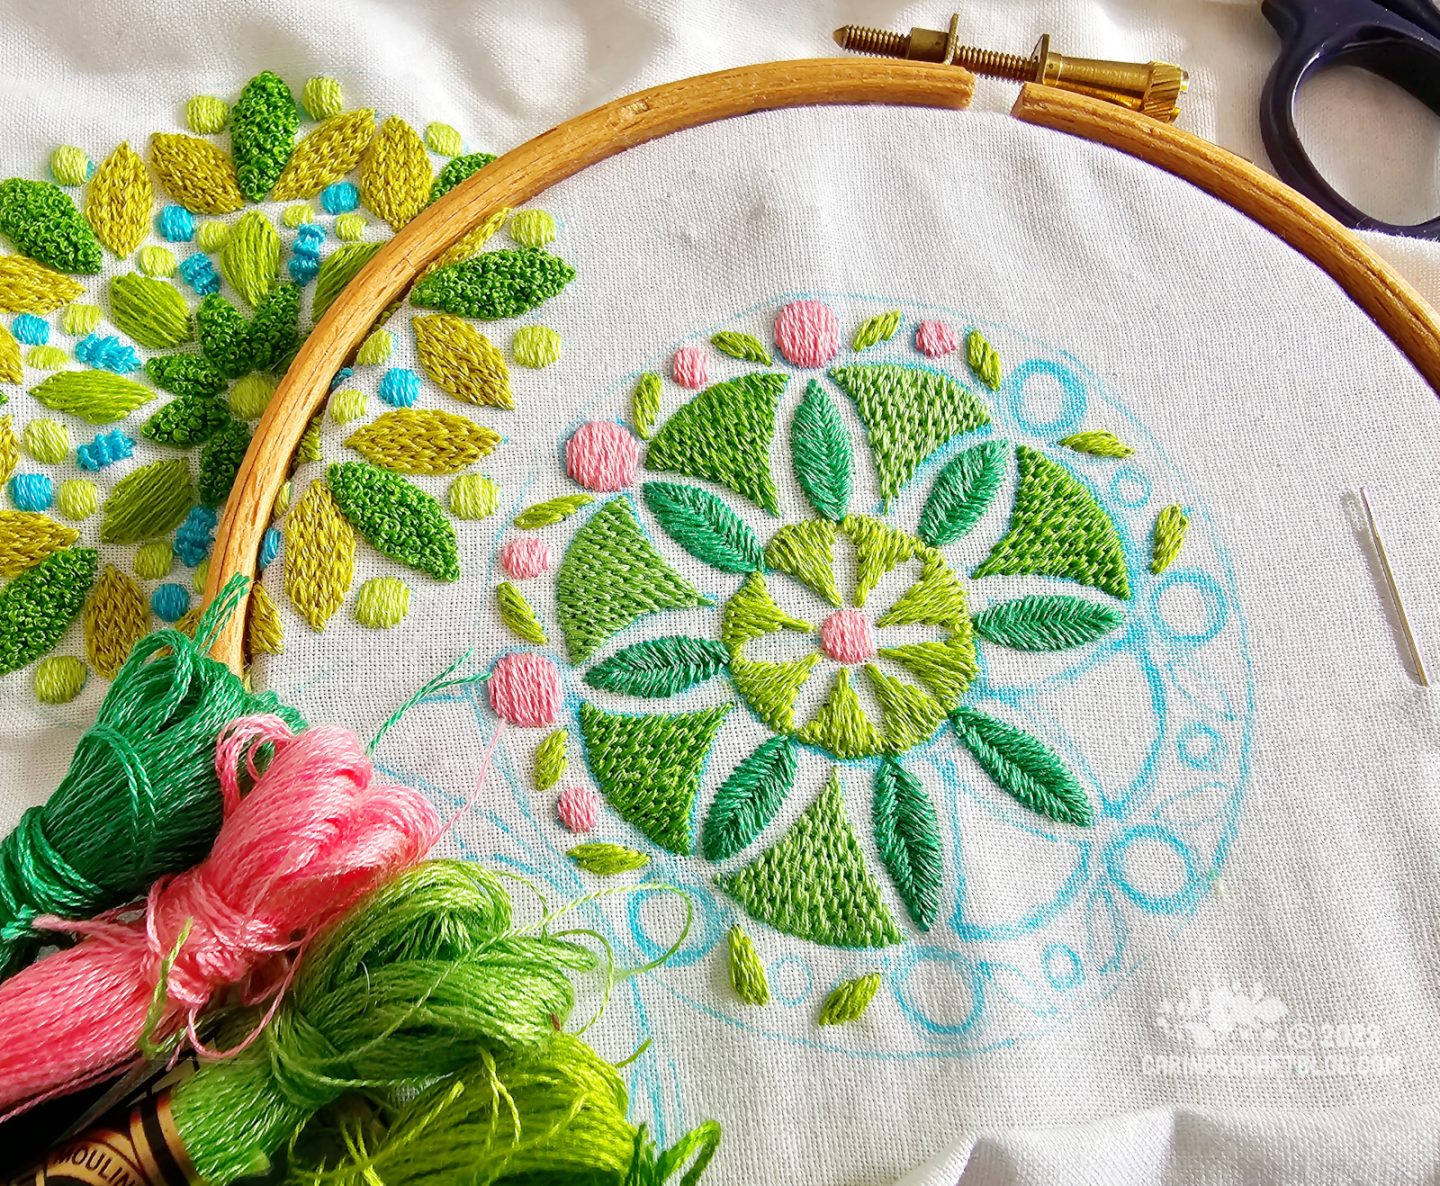 Close view of an embroidery hoop with white fabric. In the centre of the hoop is a partially stitched mandala inspired design in green and pink.